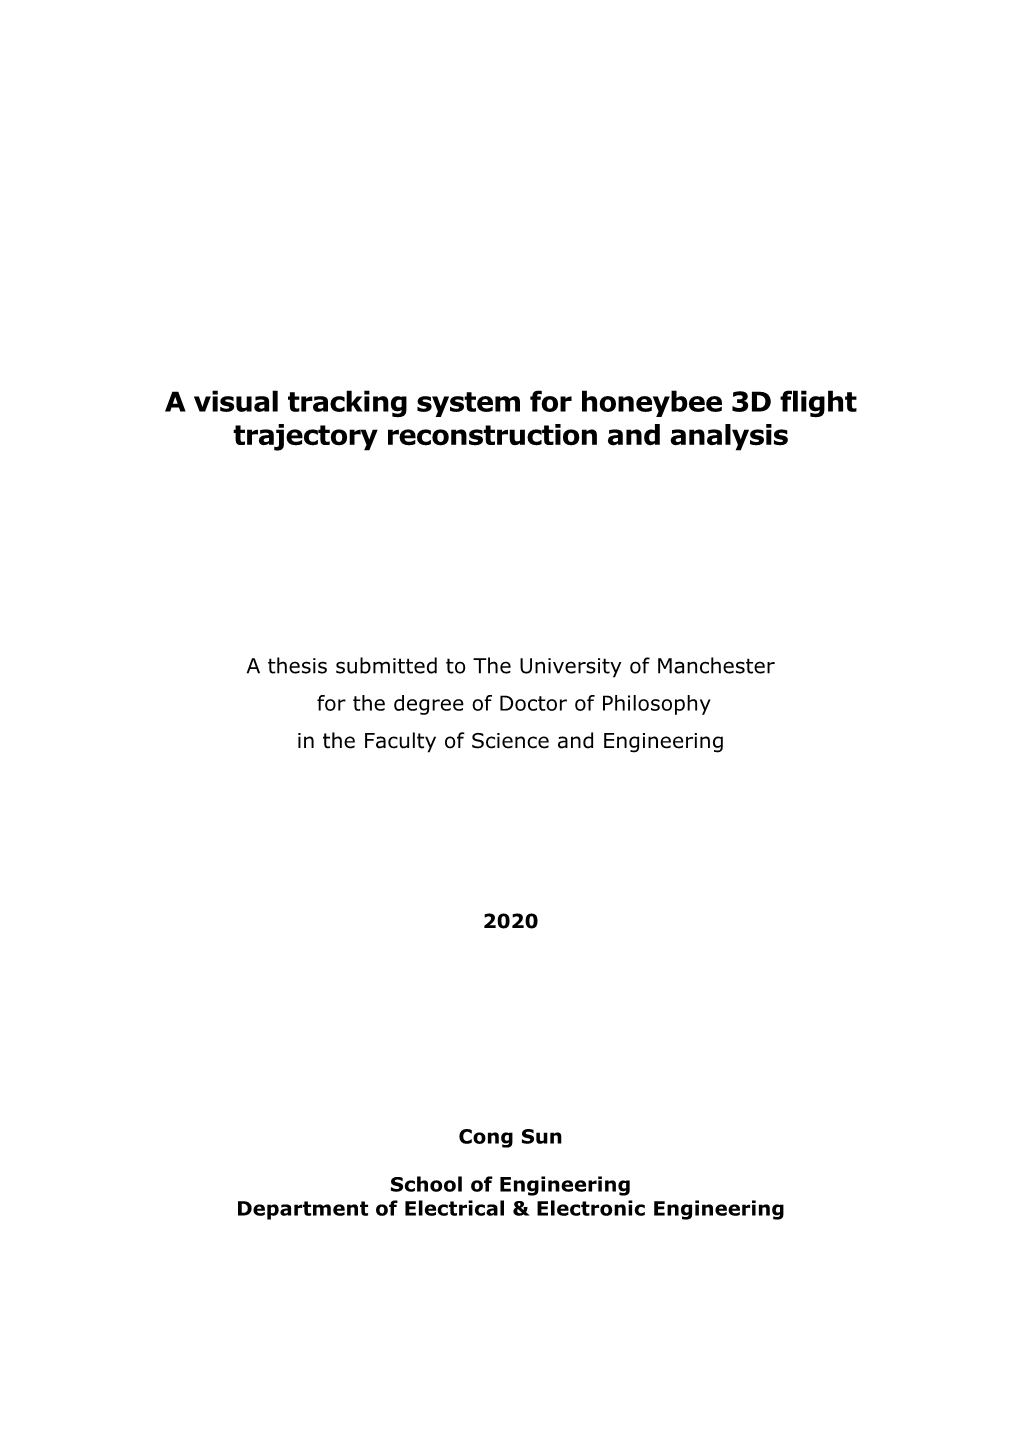 A Visual Tracking System for Honeybee 3D Flight Trajectory Reconstruction and Analysis